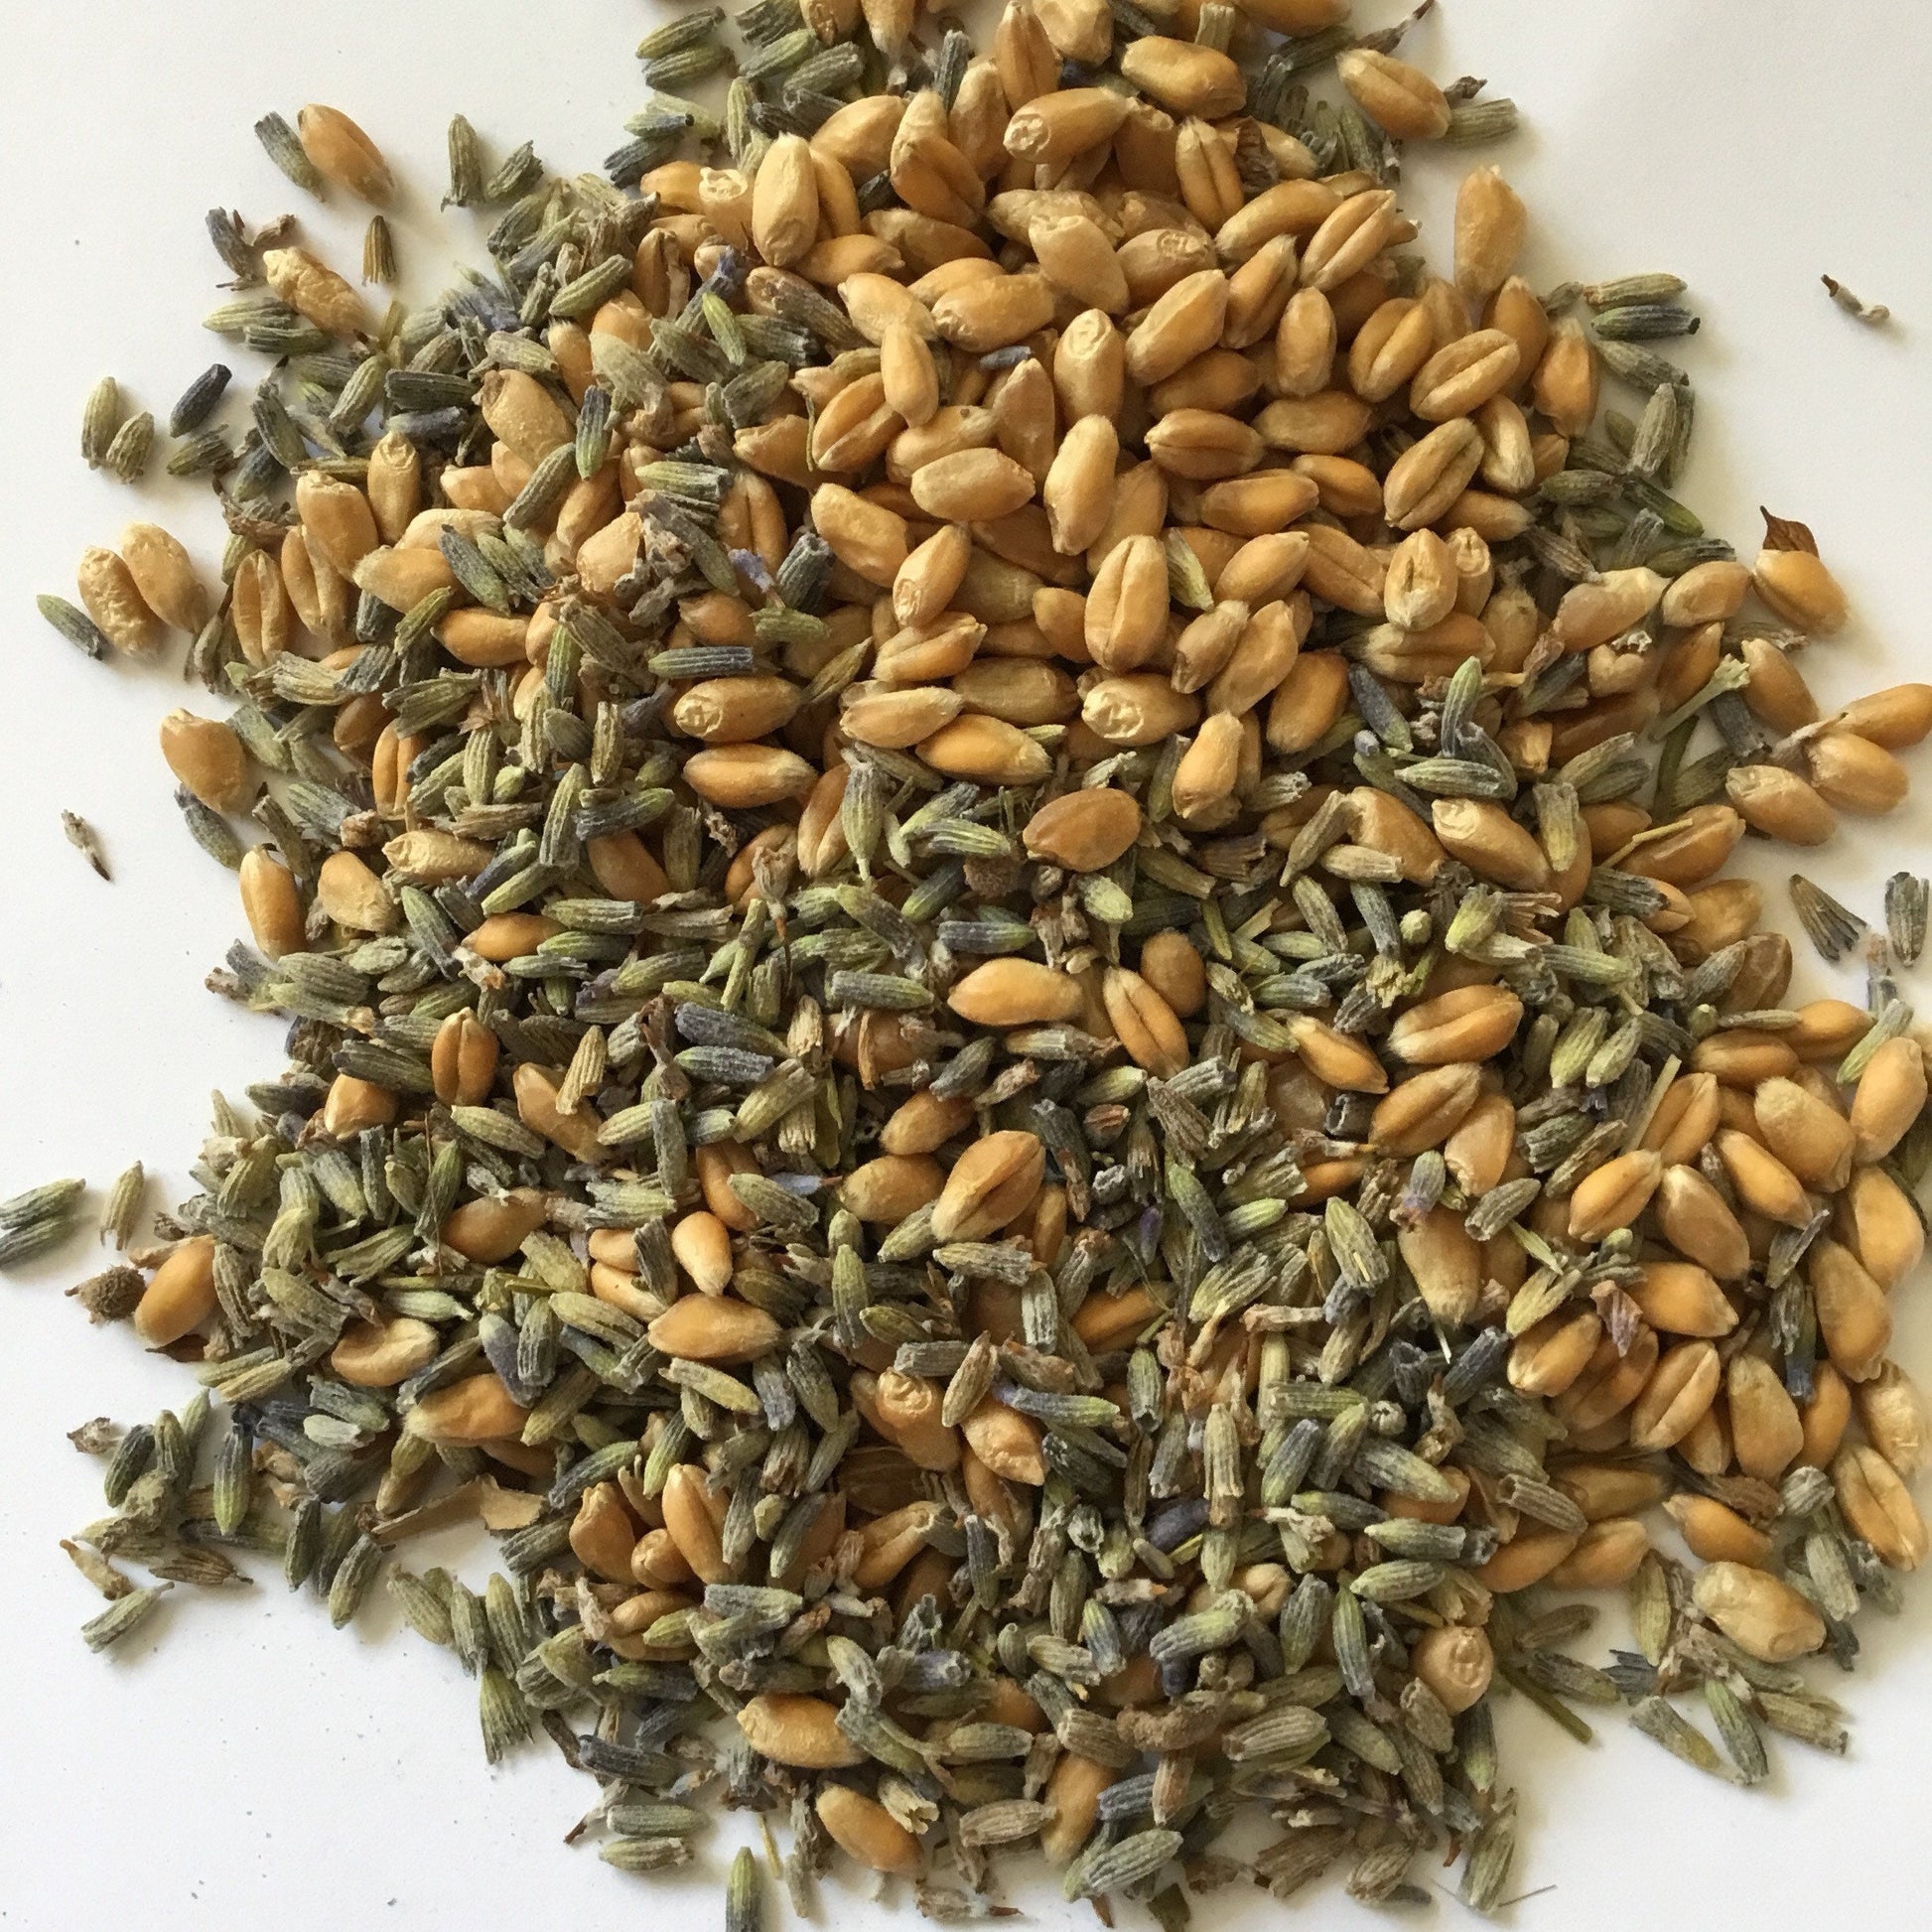 ingredients of lavender for wheat bags from wheatbag heaven